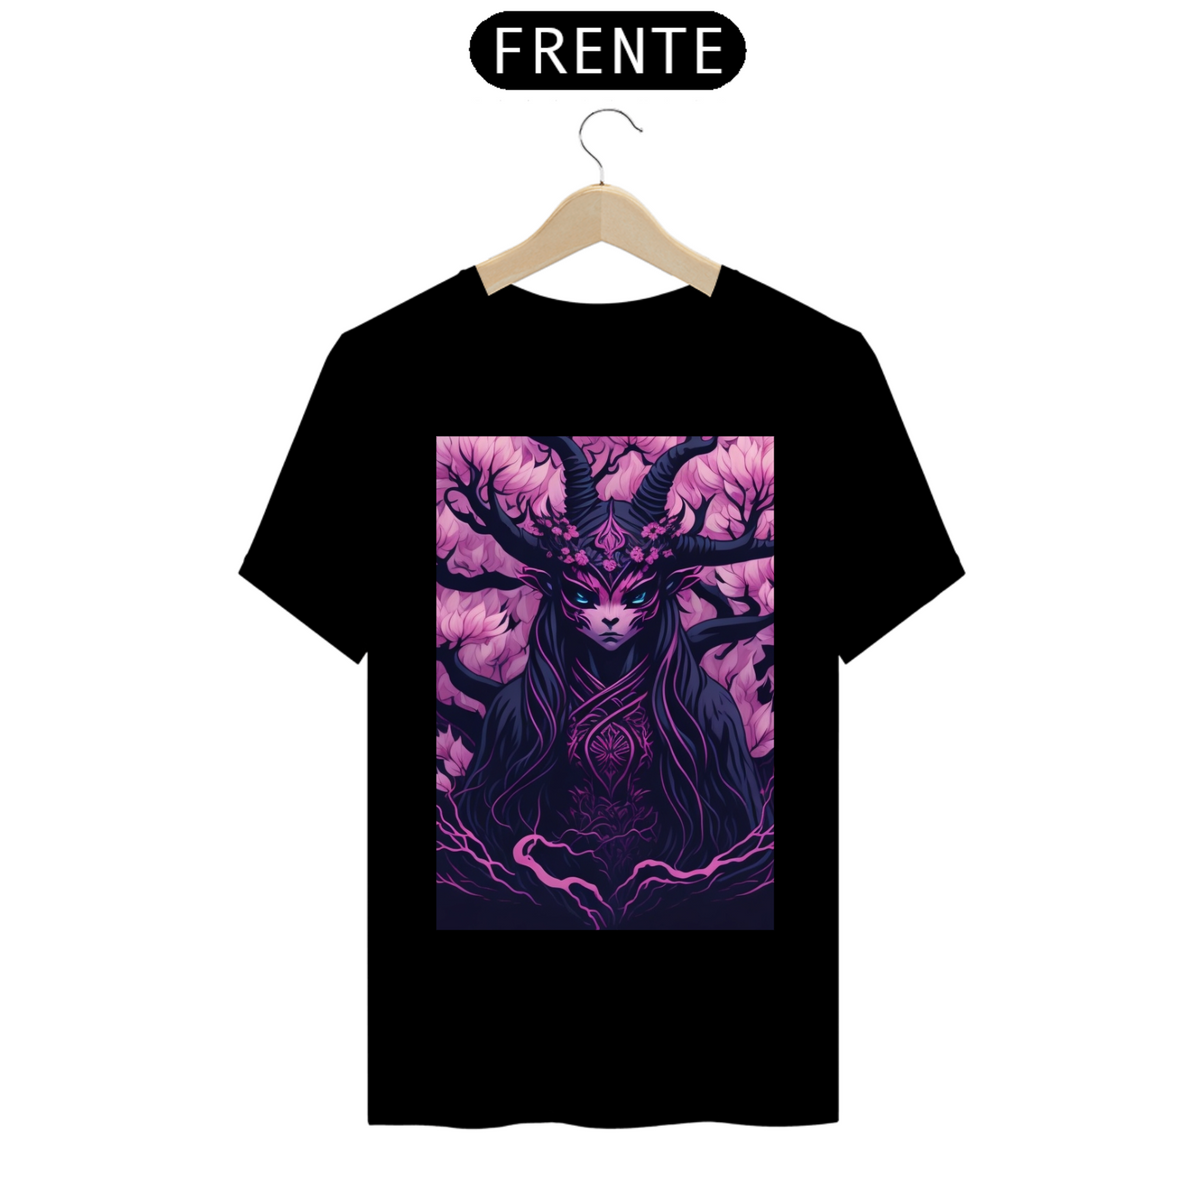 Nome do produto: T-shirt, mother of the forest